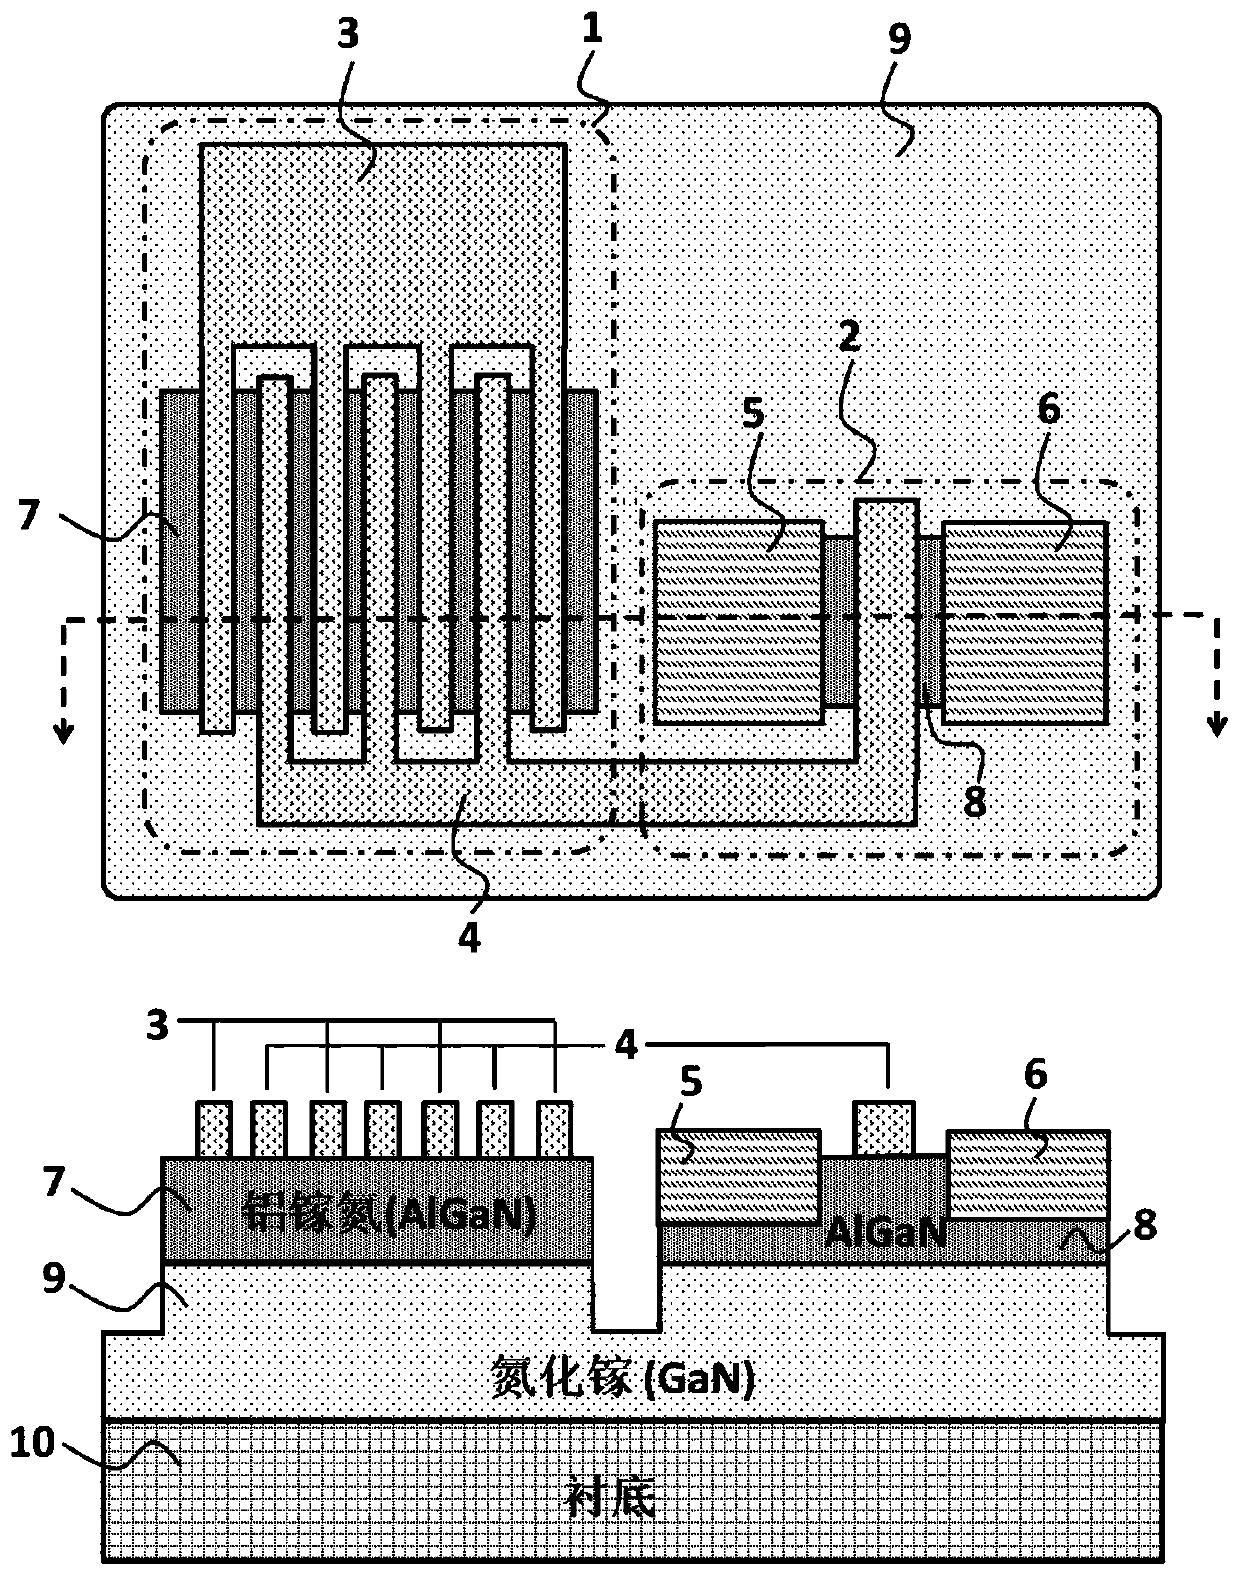 Semiconductor ultraviolet photoelectric detector